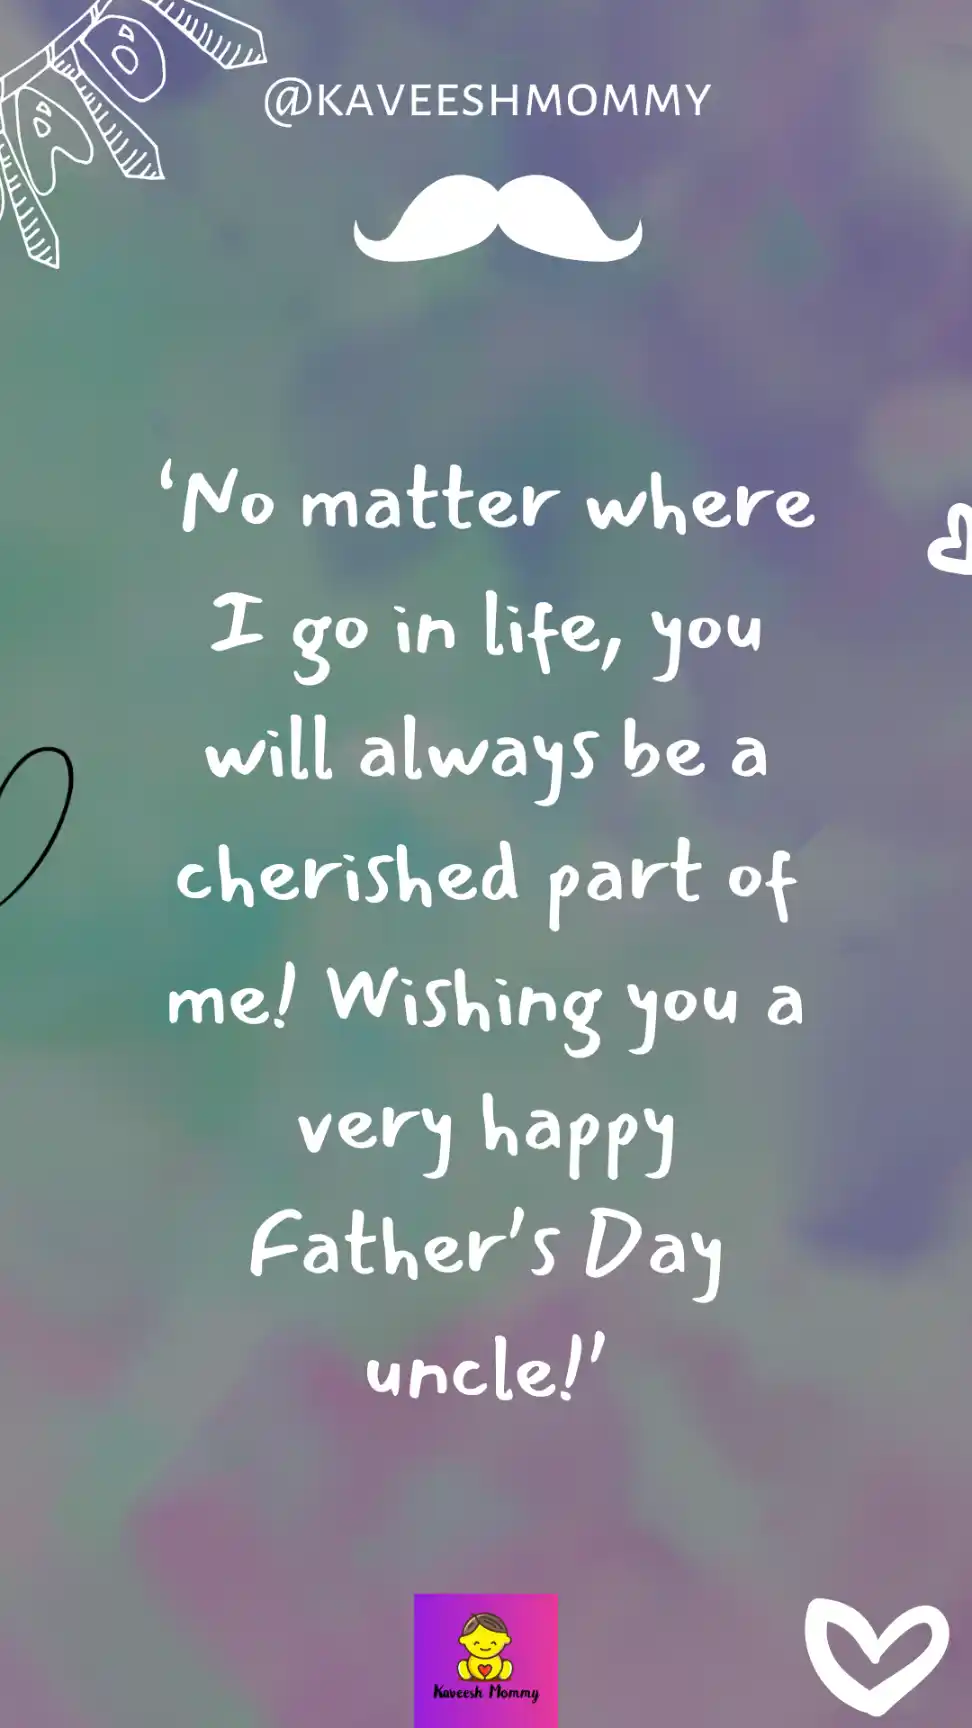 Fathers Day Messages & Quotes for Uncle
